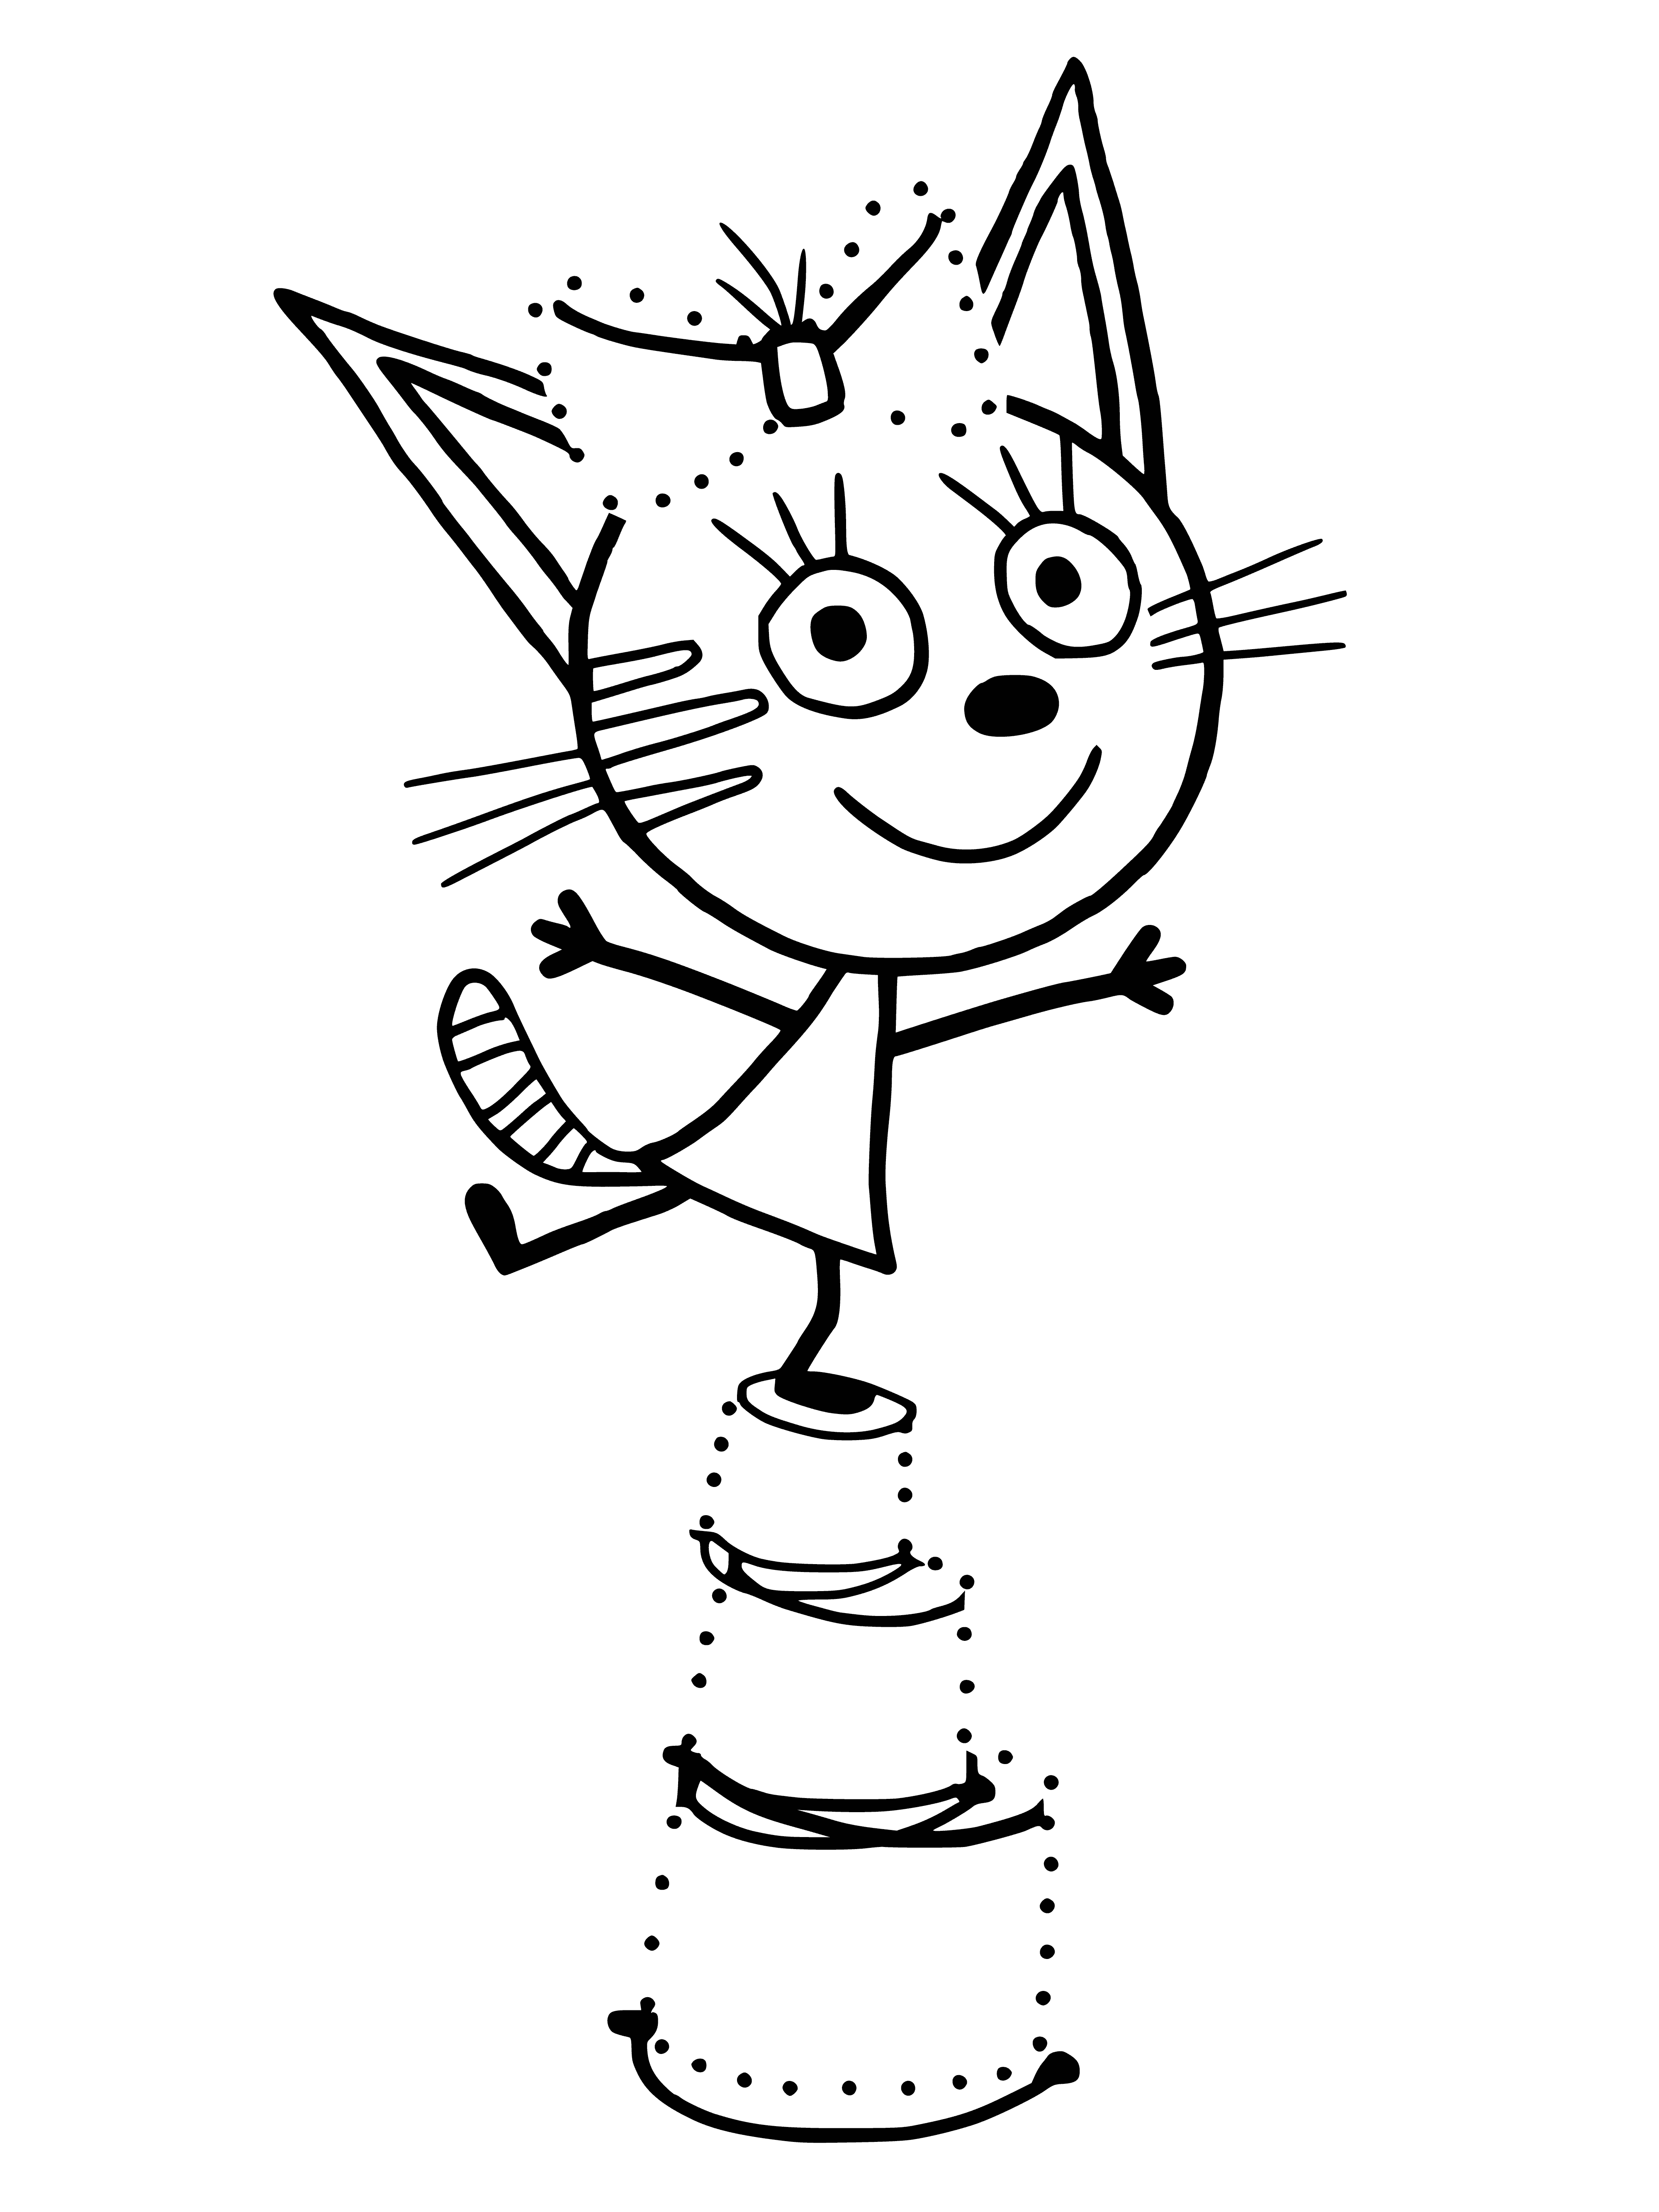 coloring page: 3 cats sitting: 2 facing each other with tails crossed, 1 looking at them.